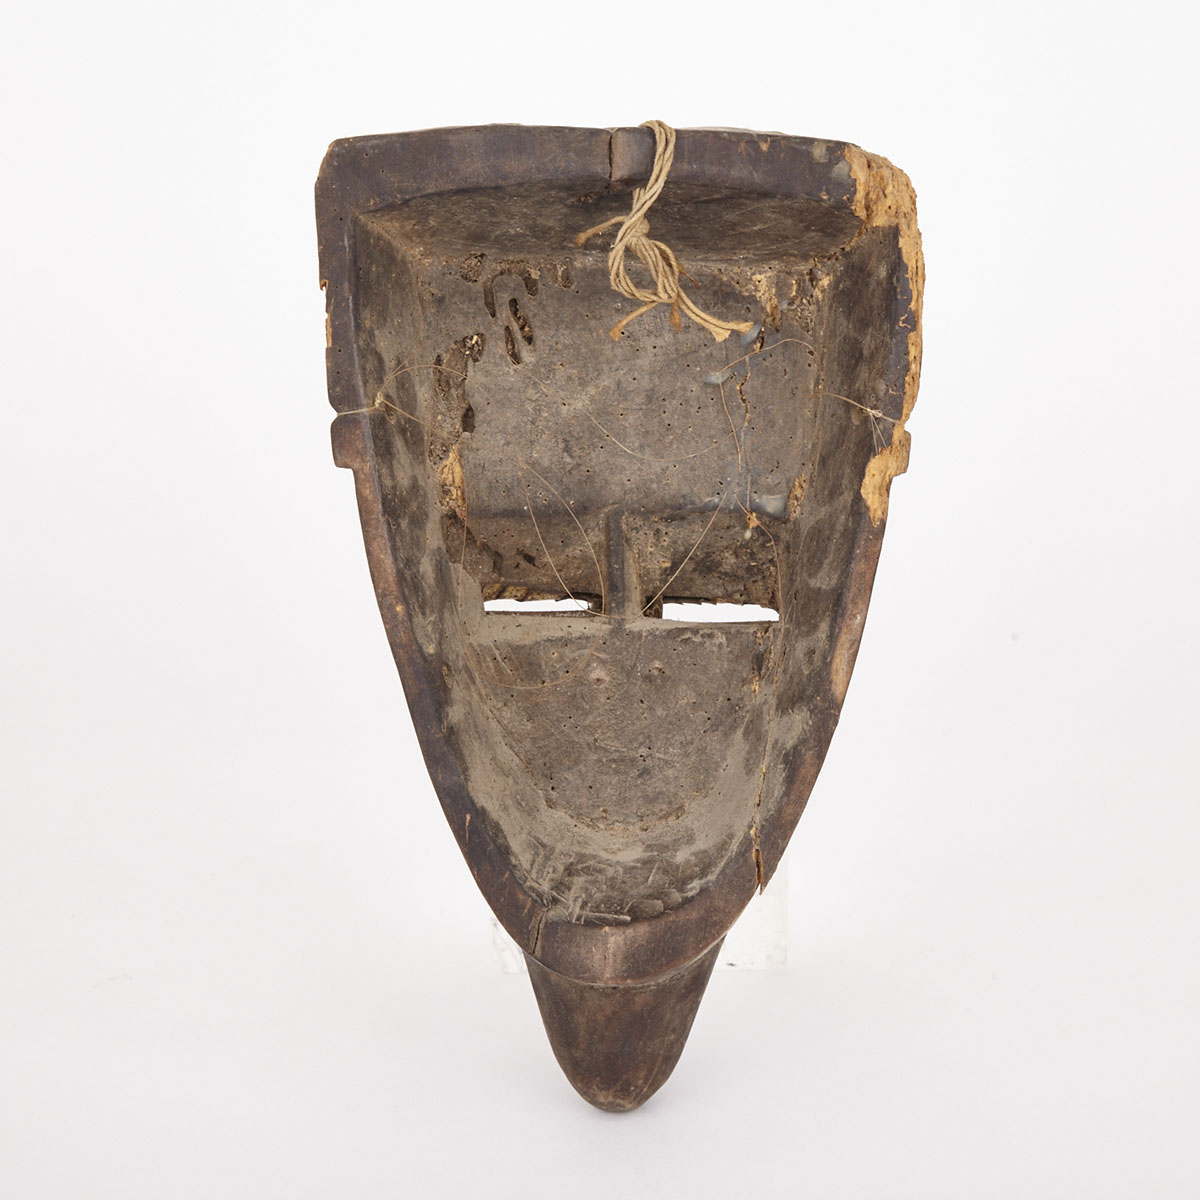 Marka Mask with applied copper decoration, West Africa, 20th century